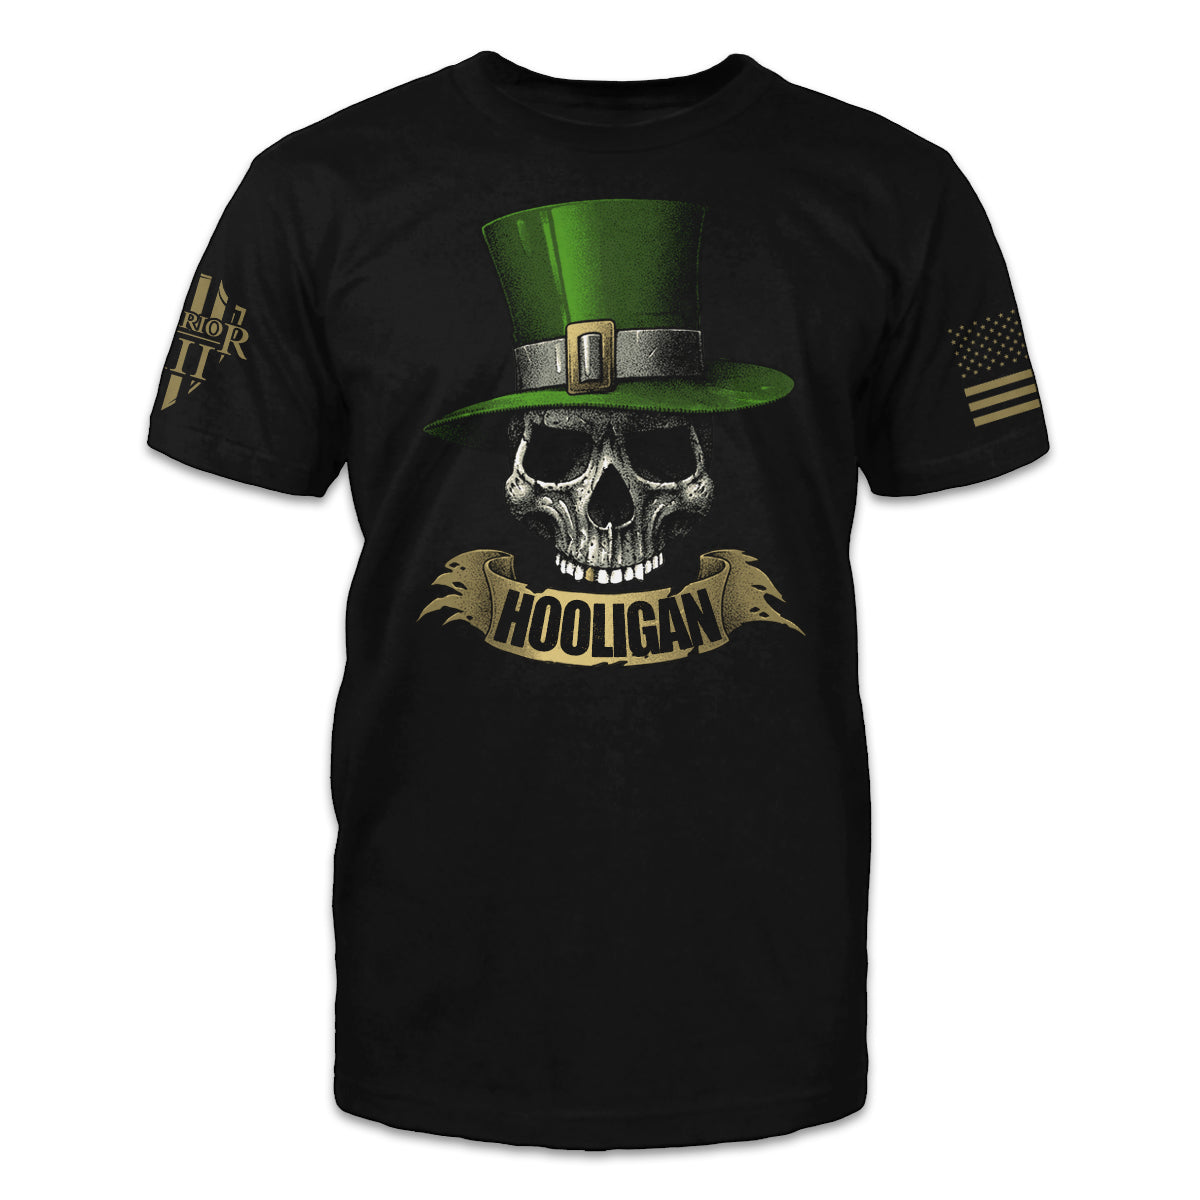 A black t-shirt with the word "Hooligan" on scrollwork under a skull wearing a leprechaun hat.